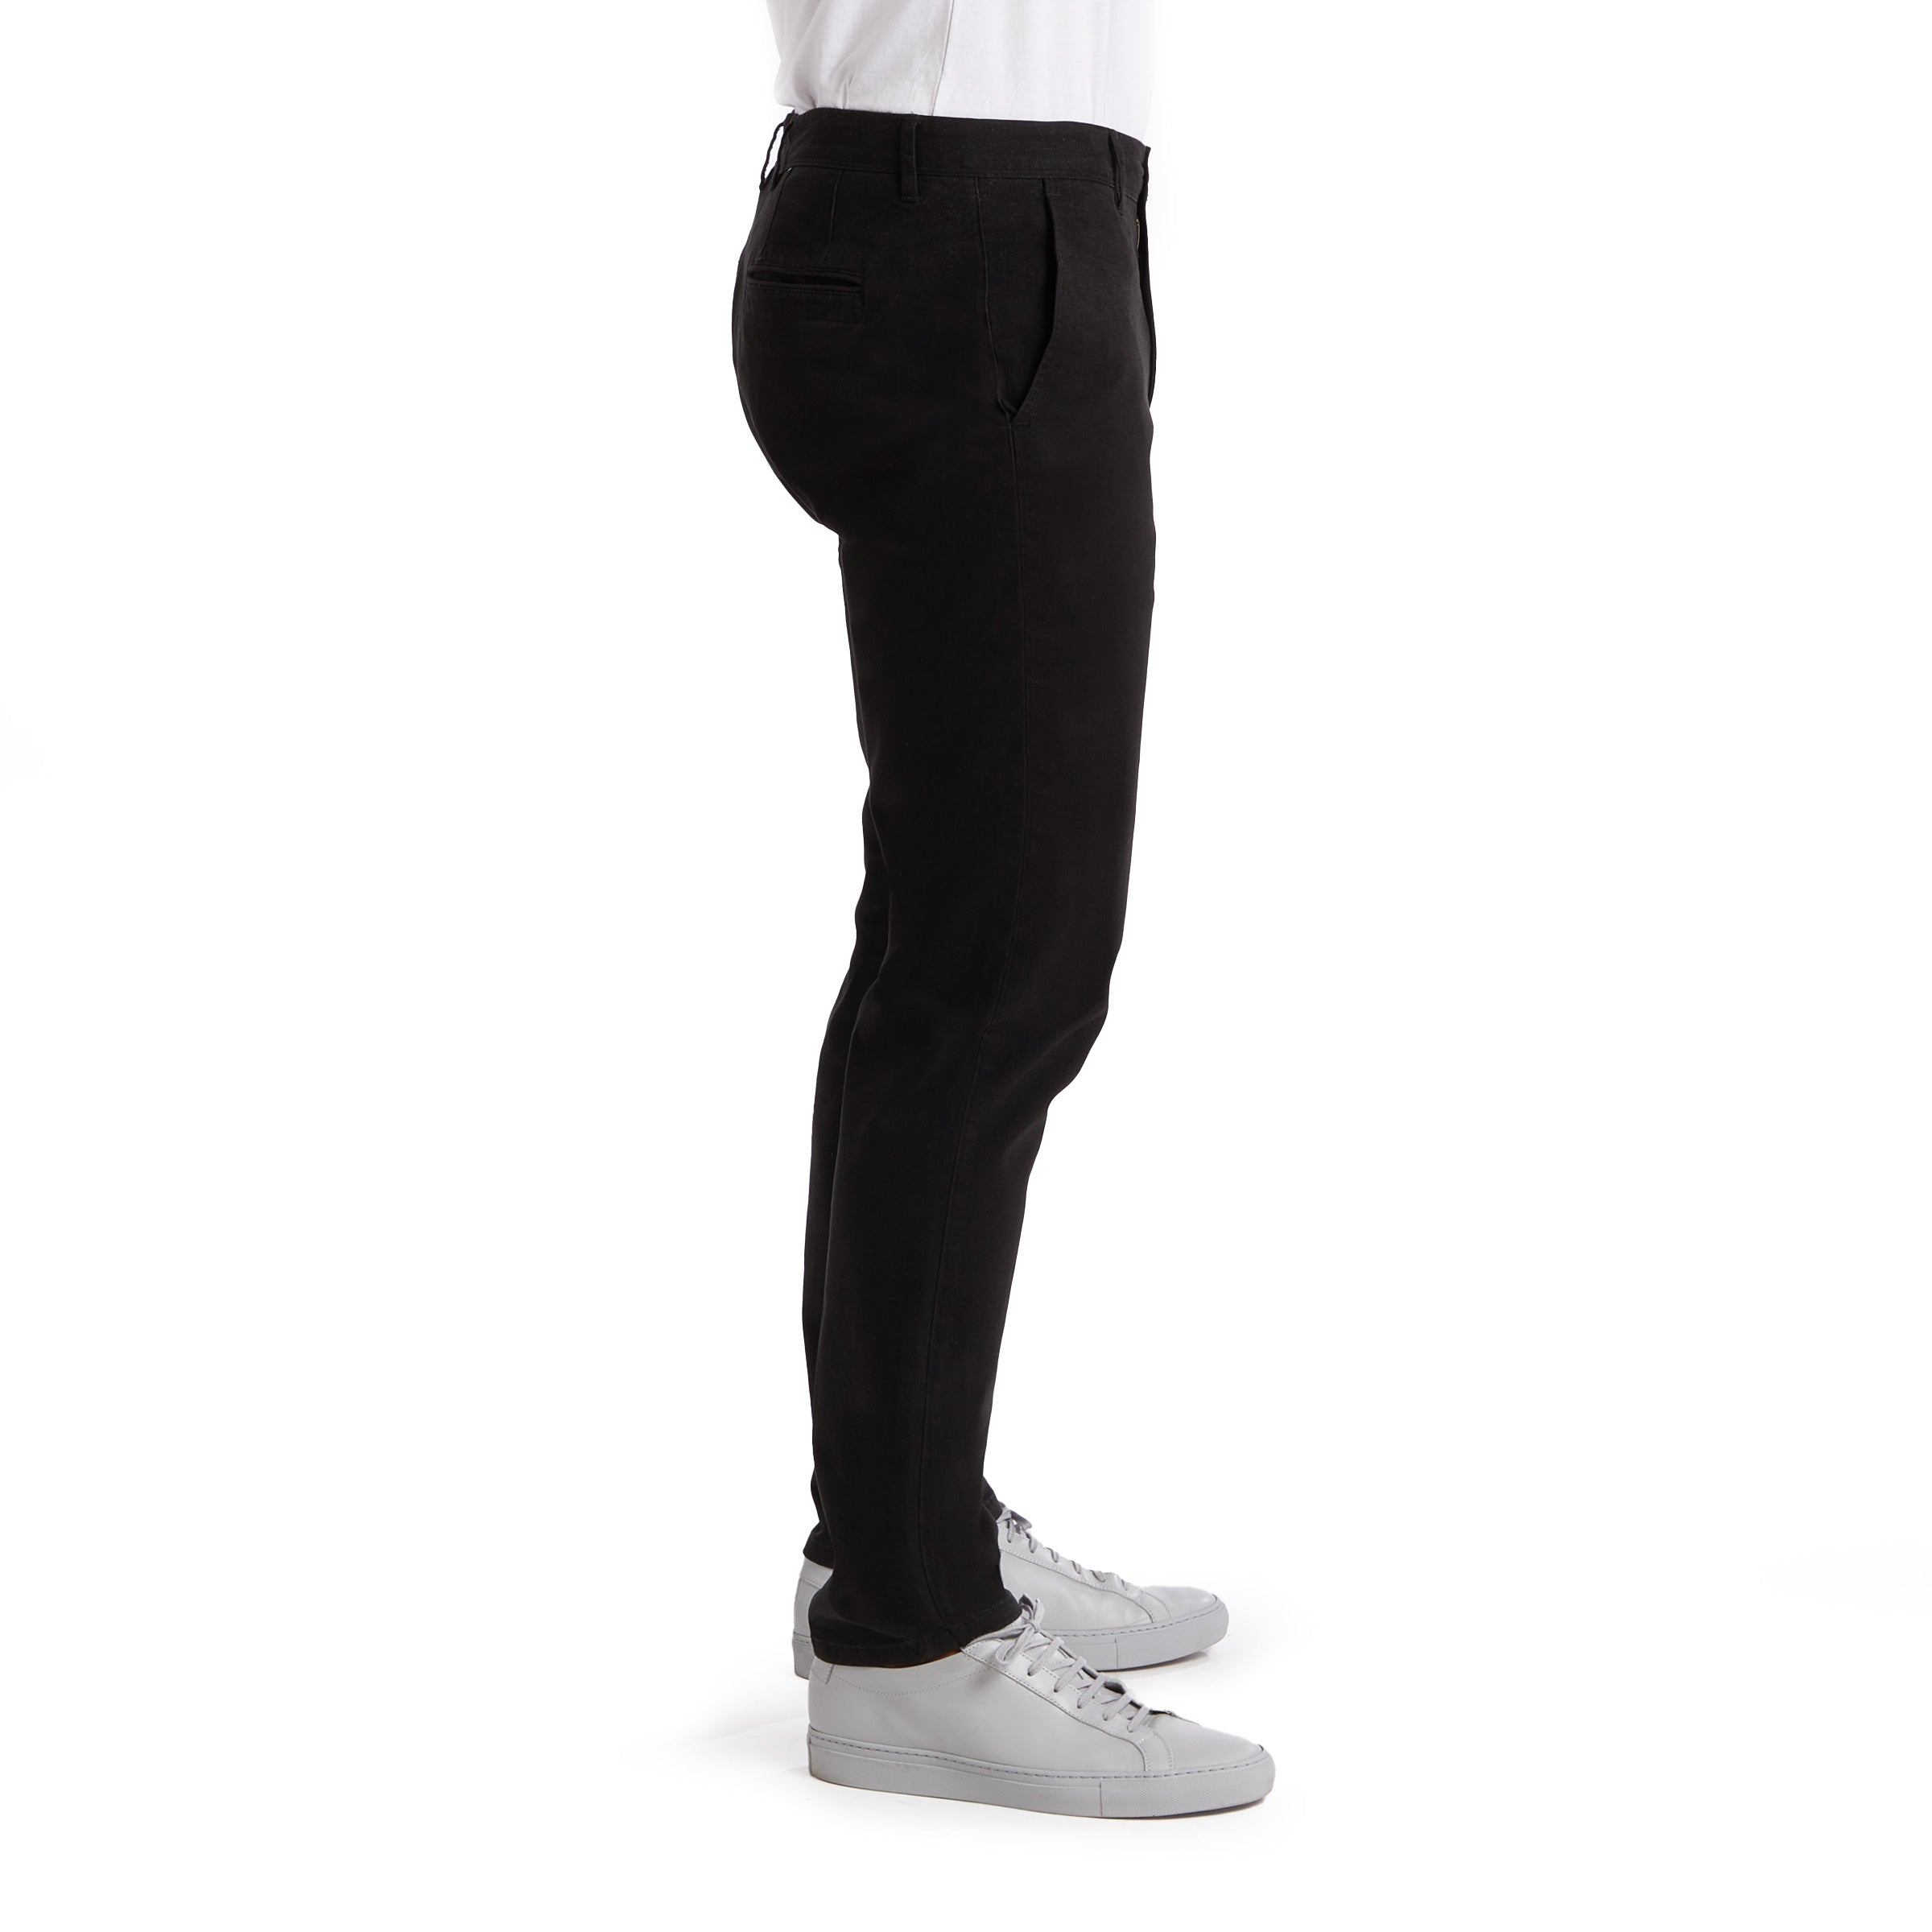 The Best Chino Pants for Men's